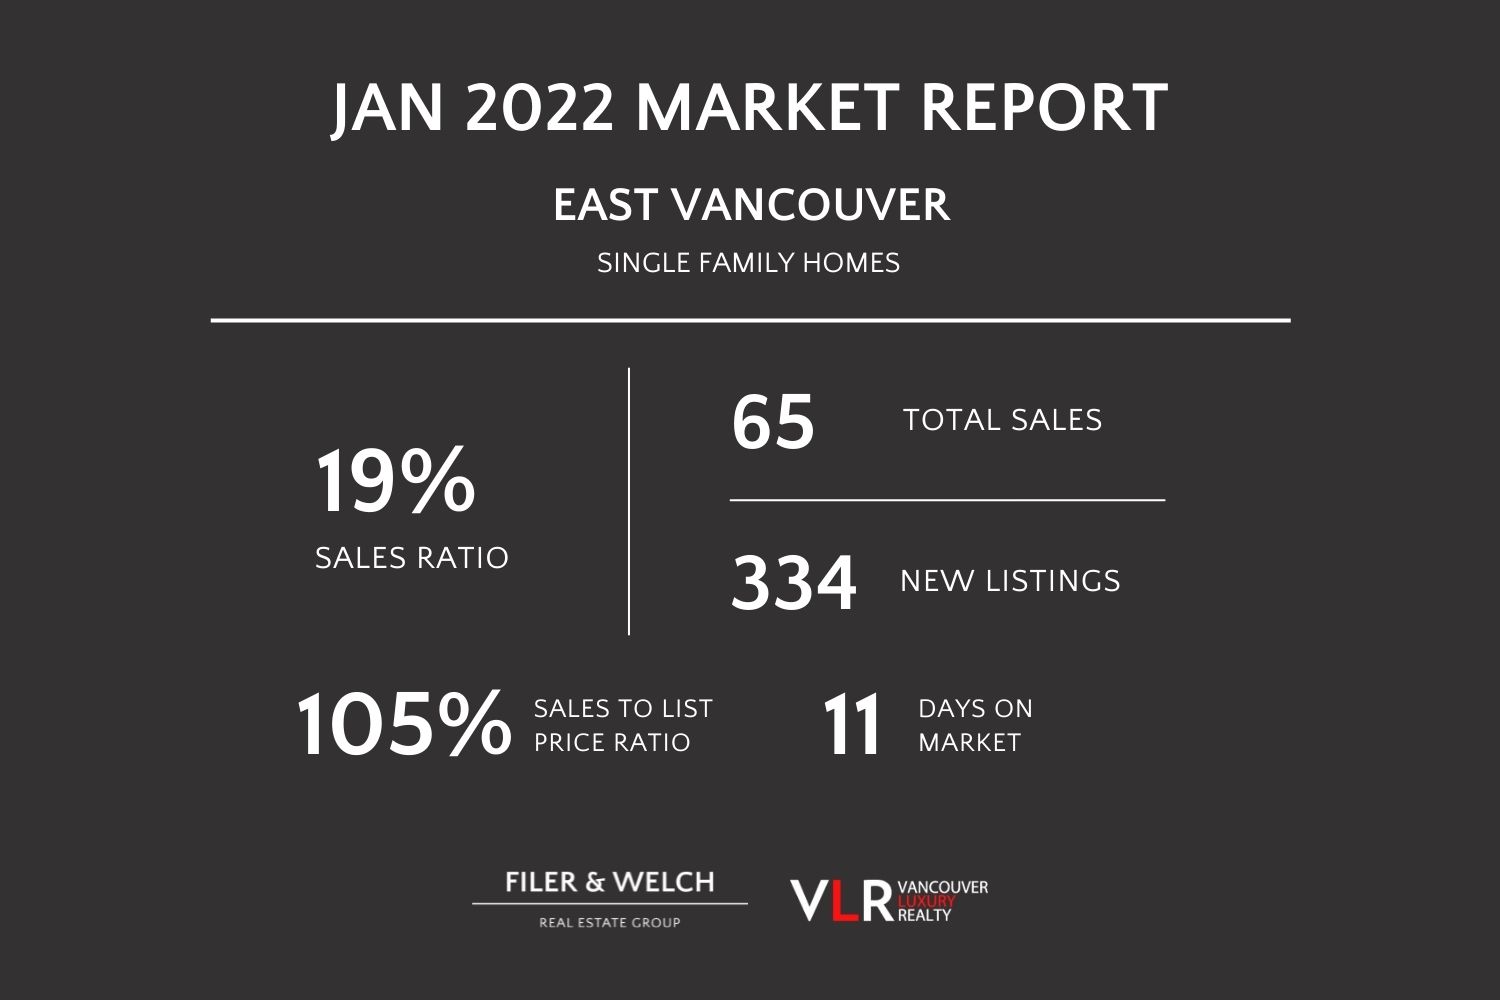 East Vancouver single family home sales ratio 19 in January 2022